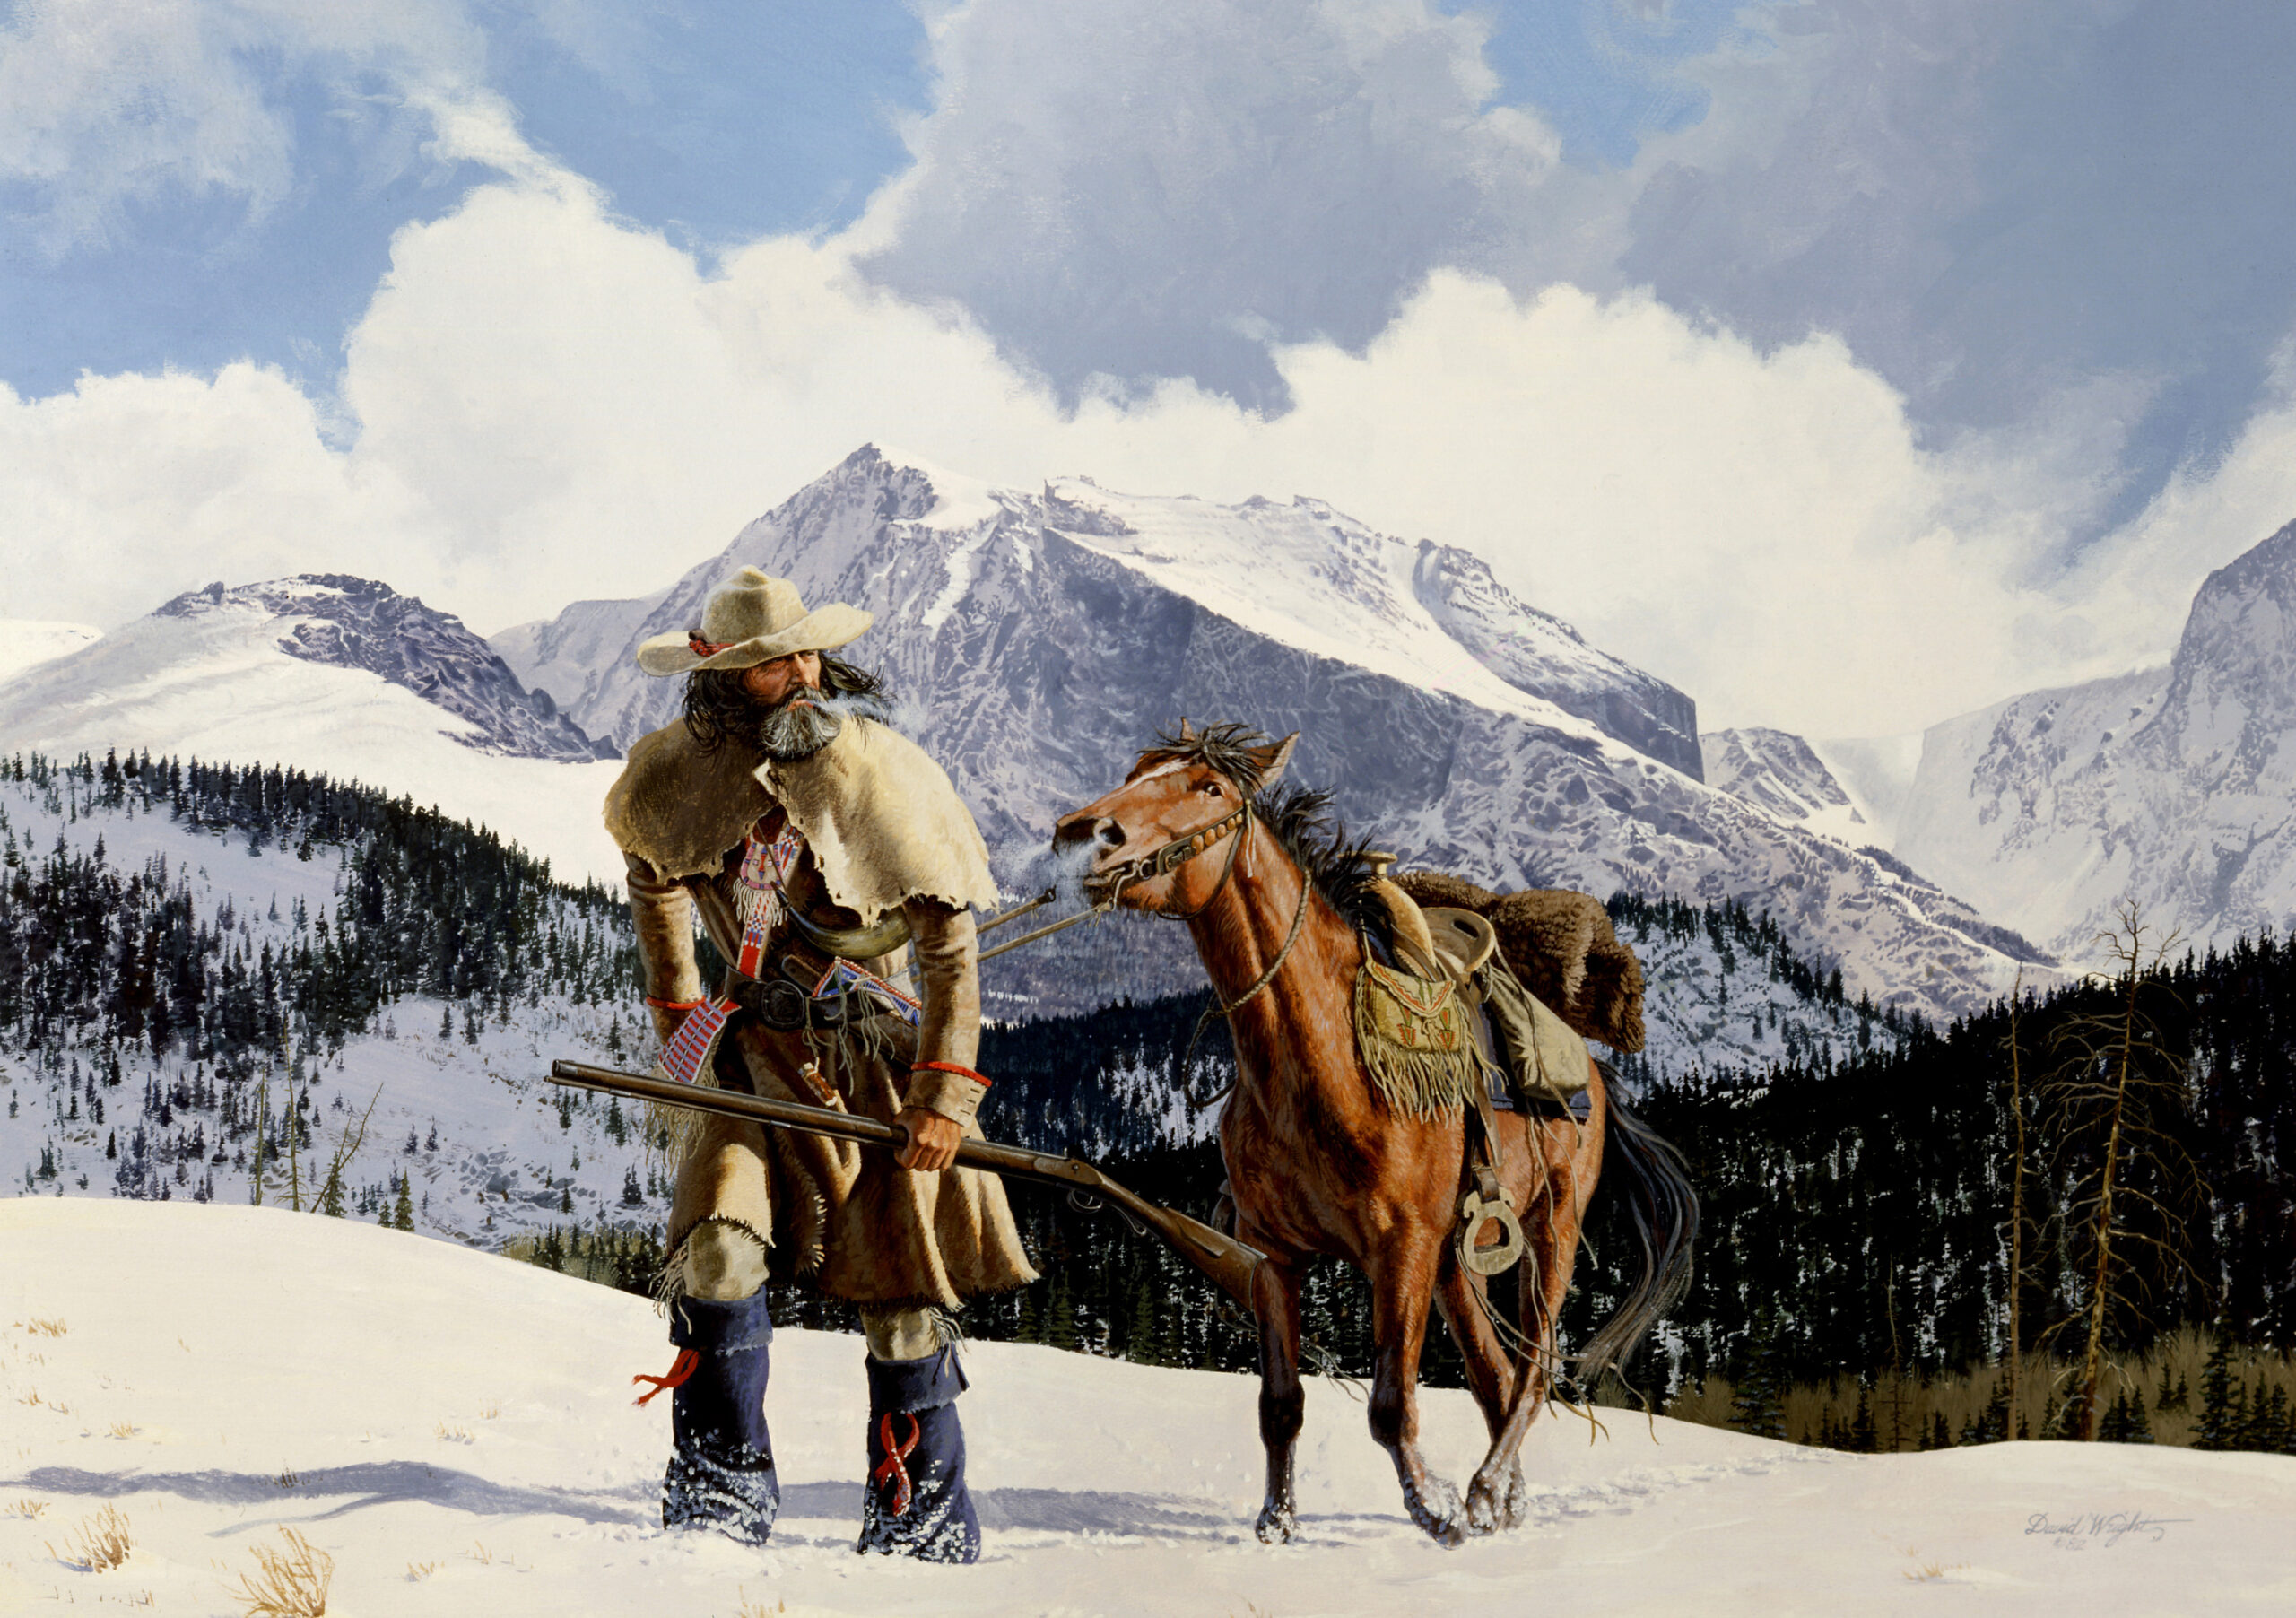 To Depict the Frontier Era with Authenticity, This Artist Walks in the Footsteps of Mountain Men